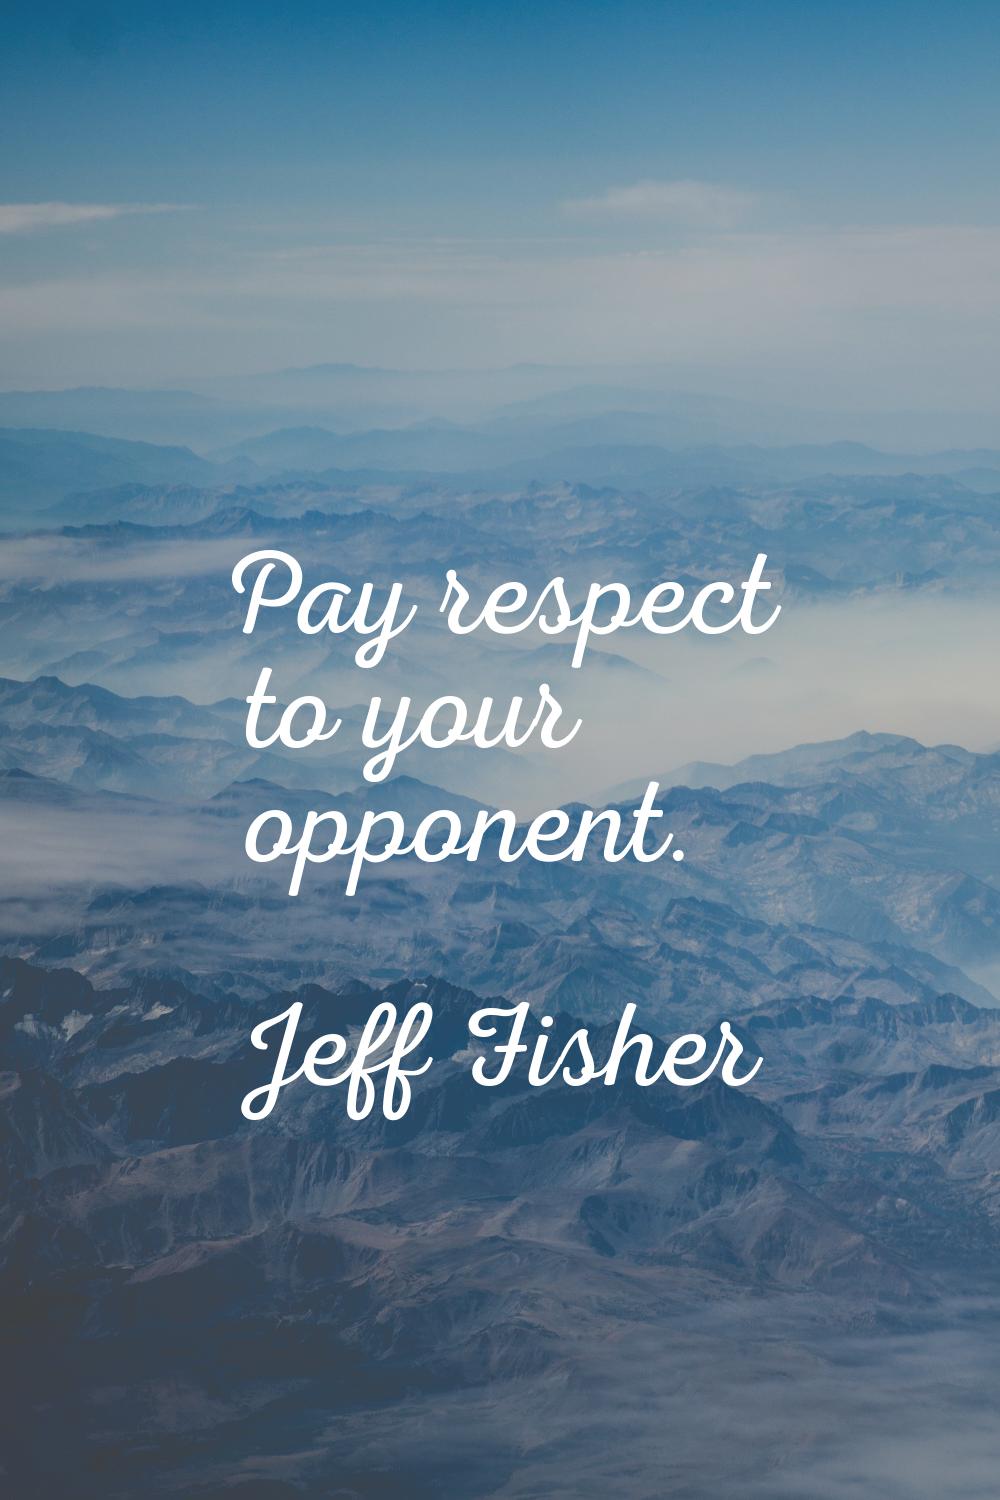 Pay respect to your opponent.